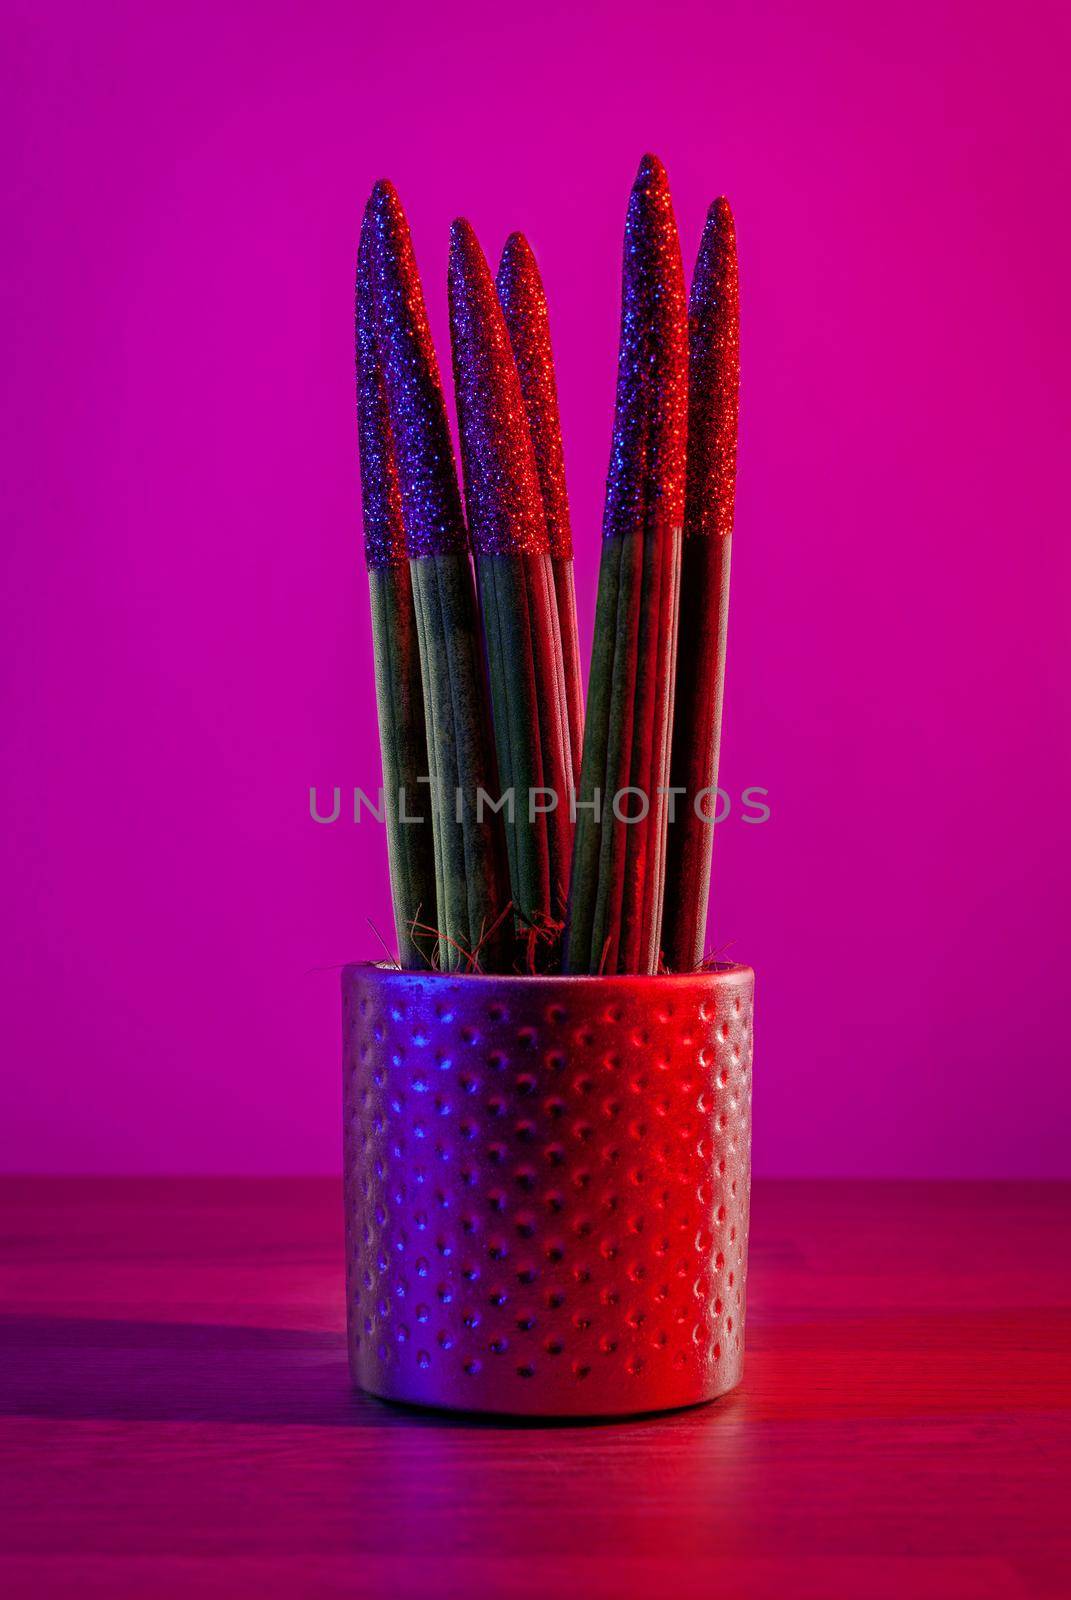 Decorative house plant - Sansevieria cylindrica on a pot stands on a wooden table on dark pink background. Illuminated in red and blue.